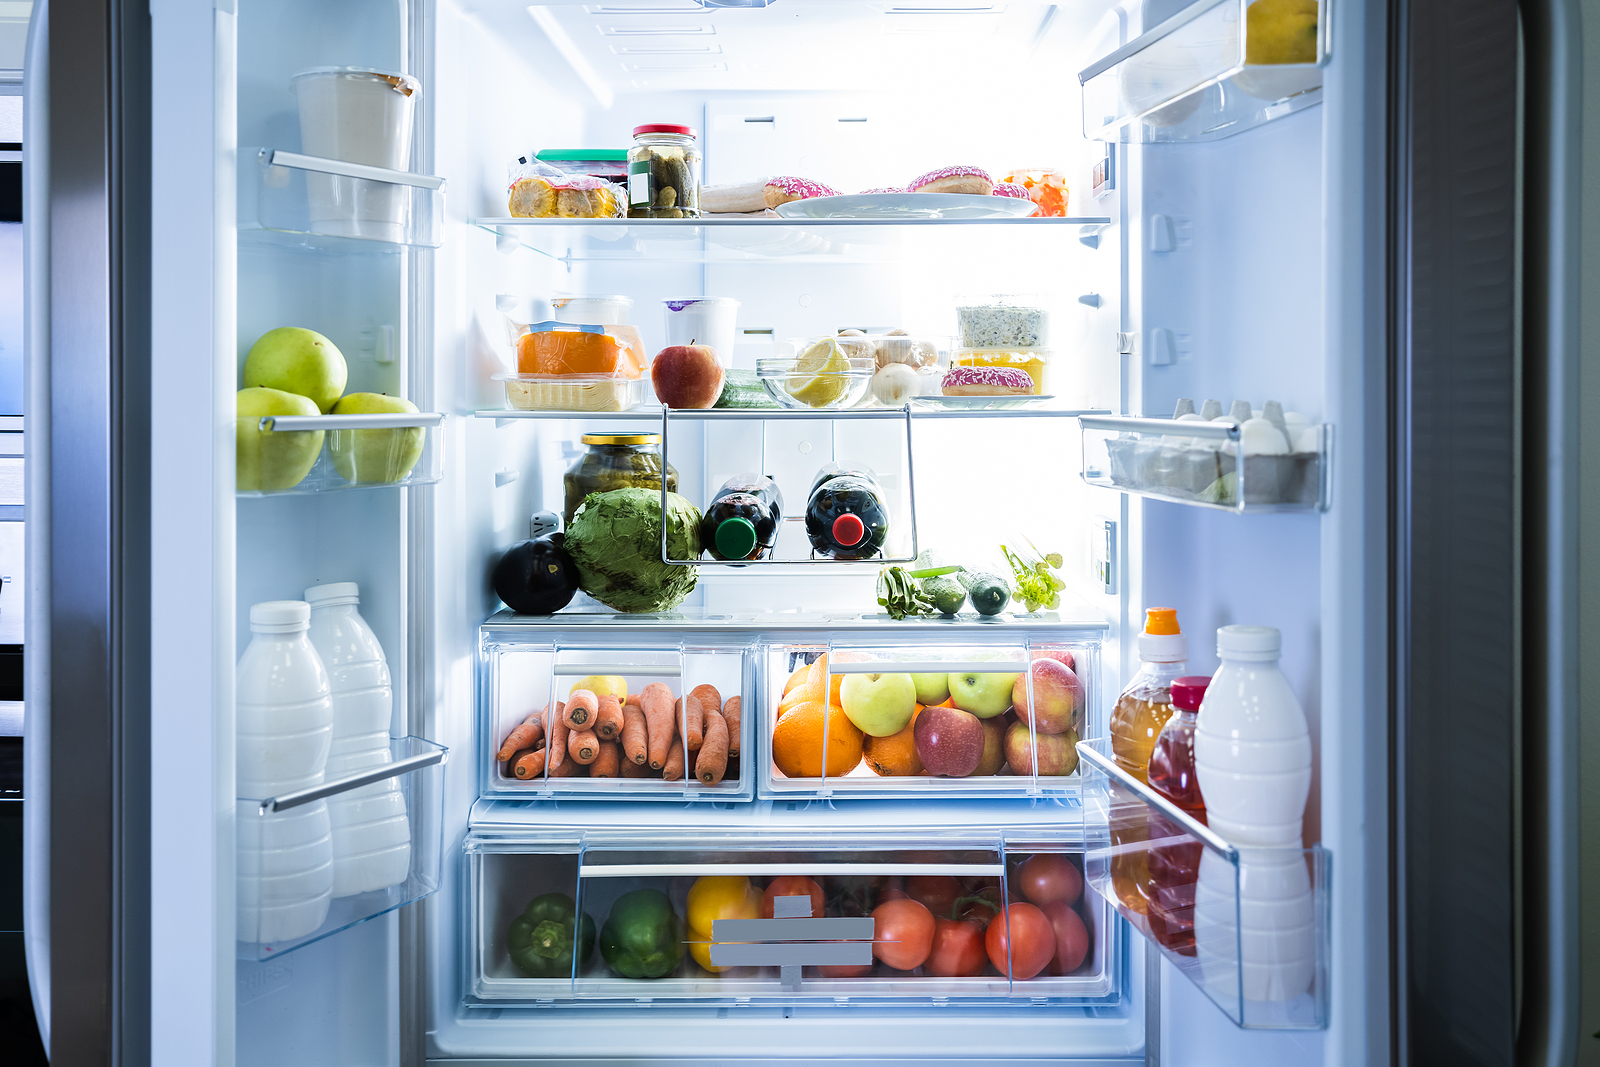 What To Consider When Buying A Used Refrigerator